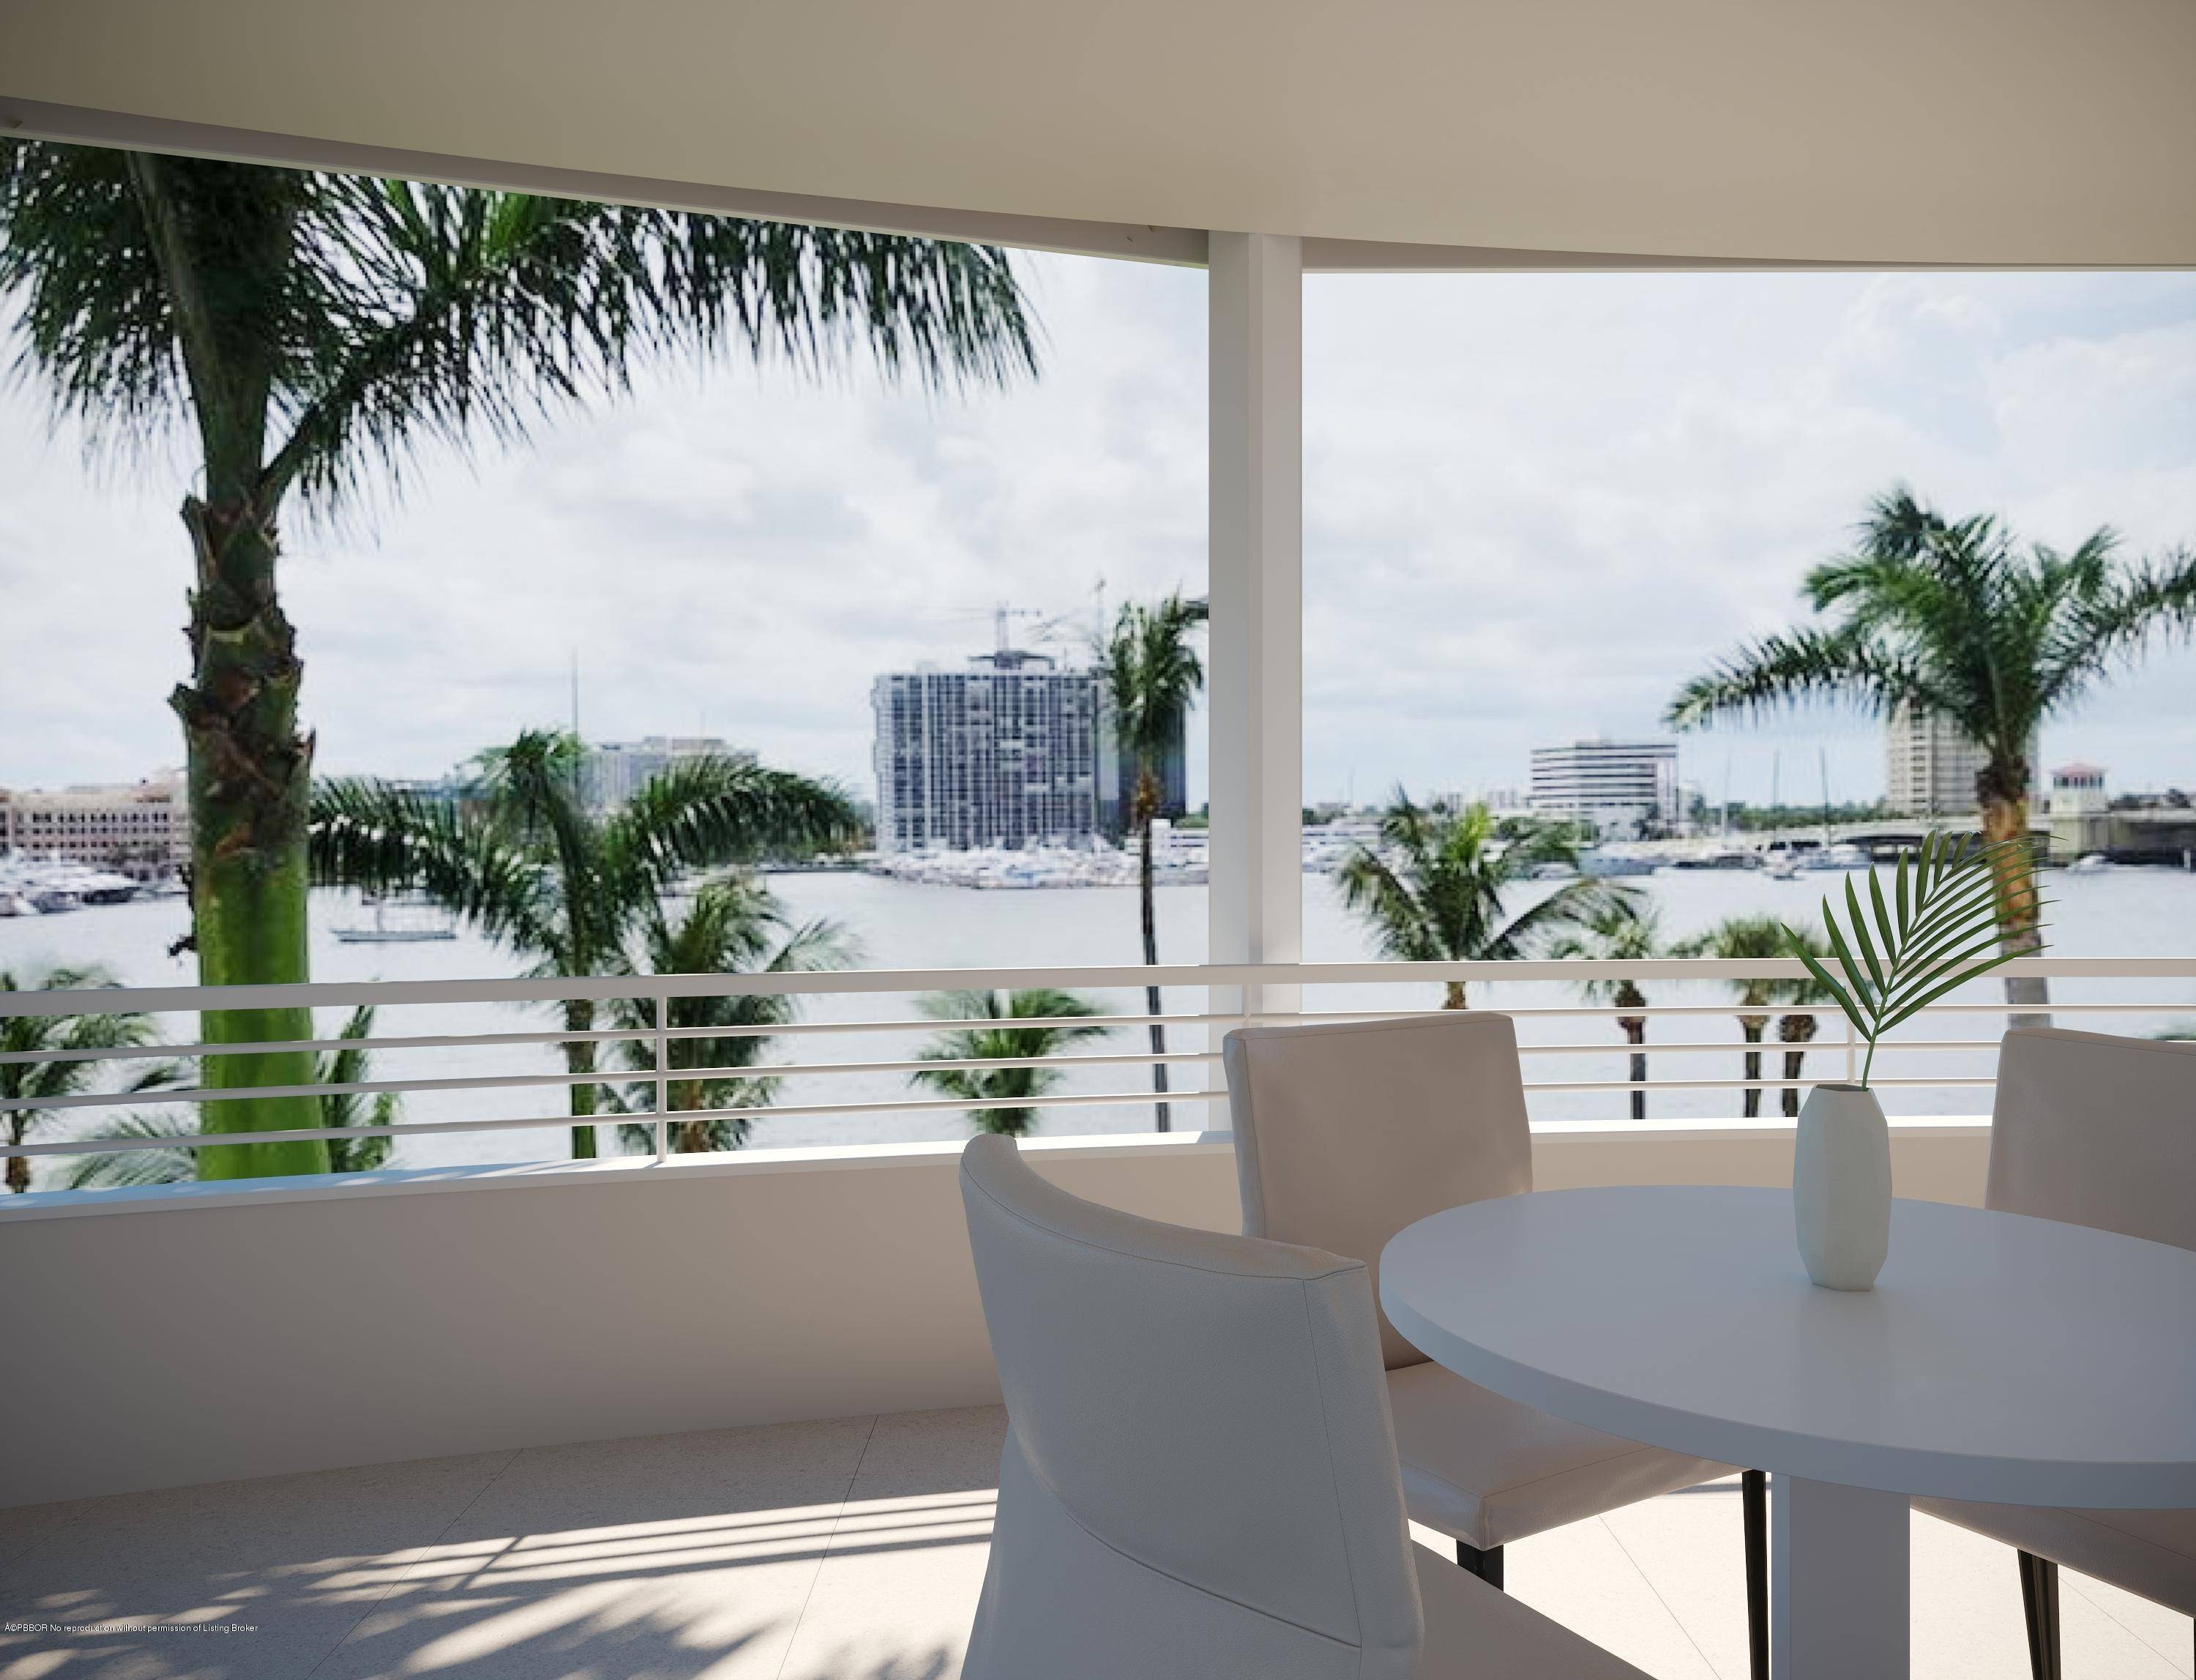 COMING SOON ! Glamorous Direct Lakefront Wraparound Corner Residence at Palm Beach Towers.